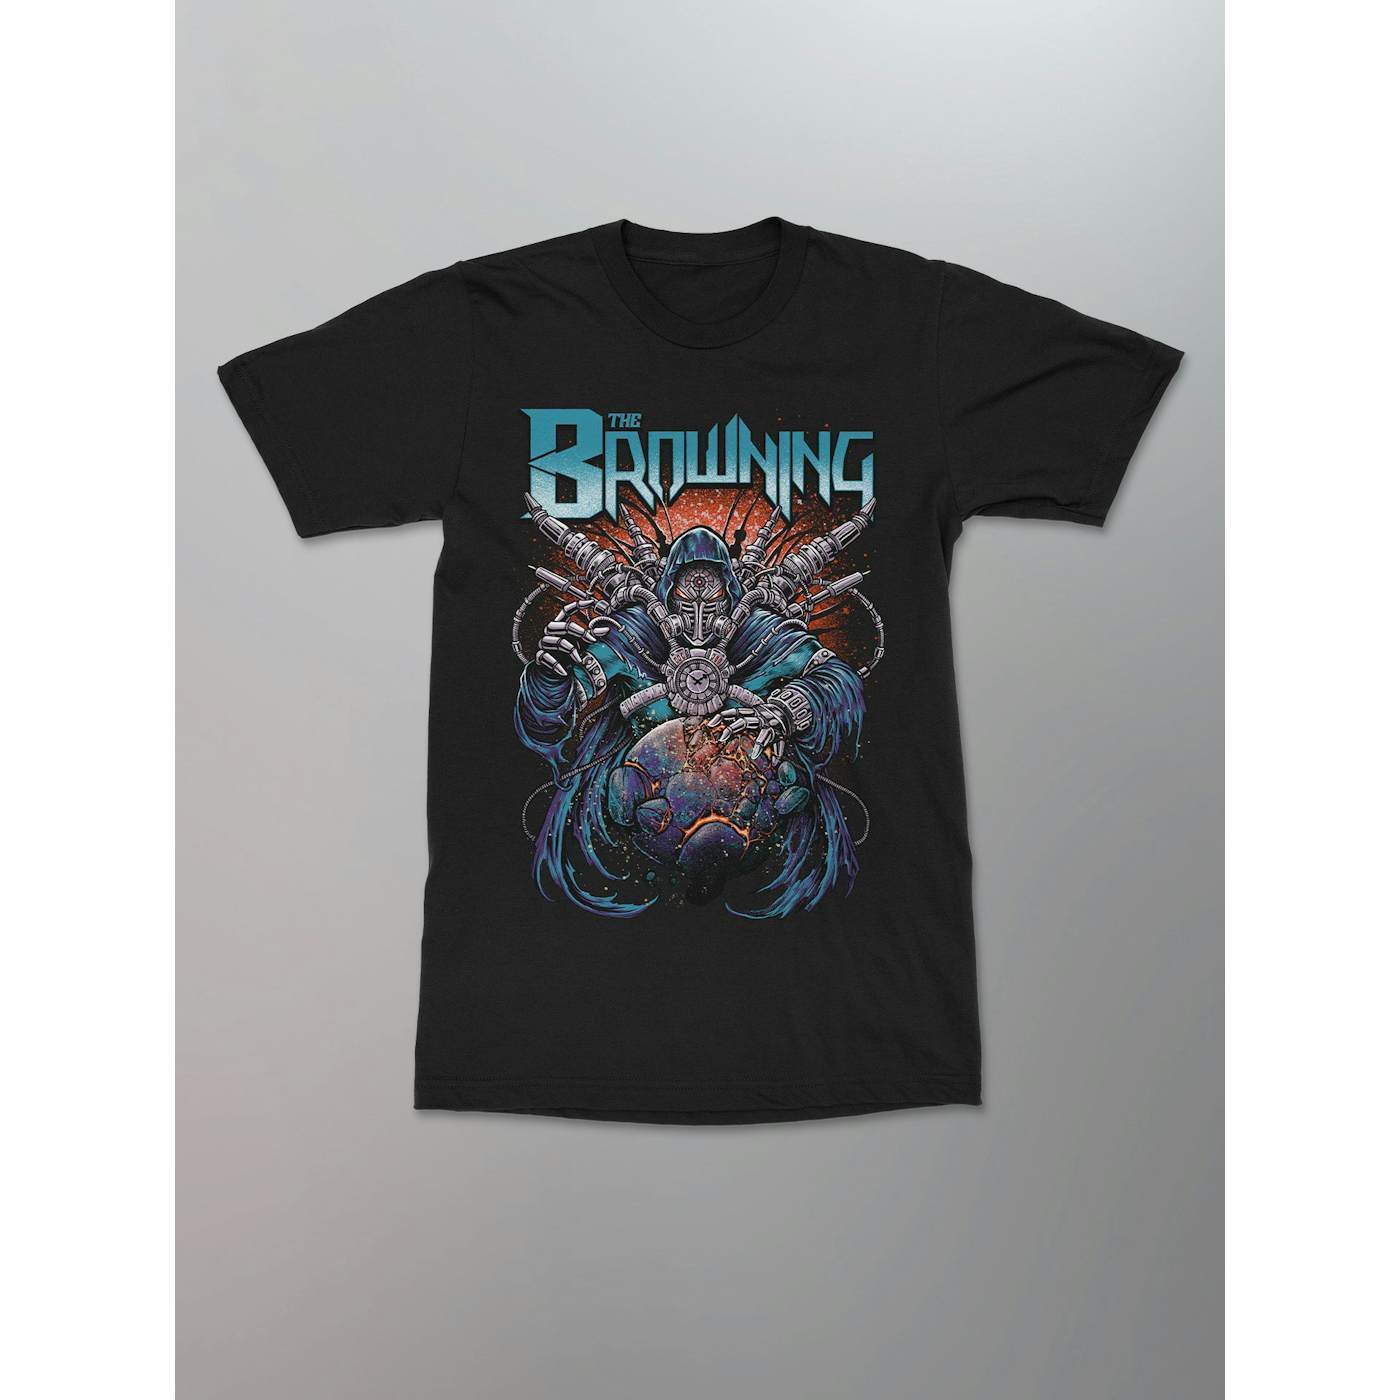 The Browning - Eater of Worlds Shirt